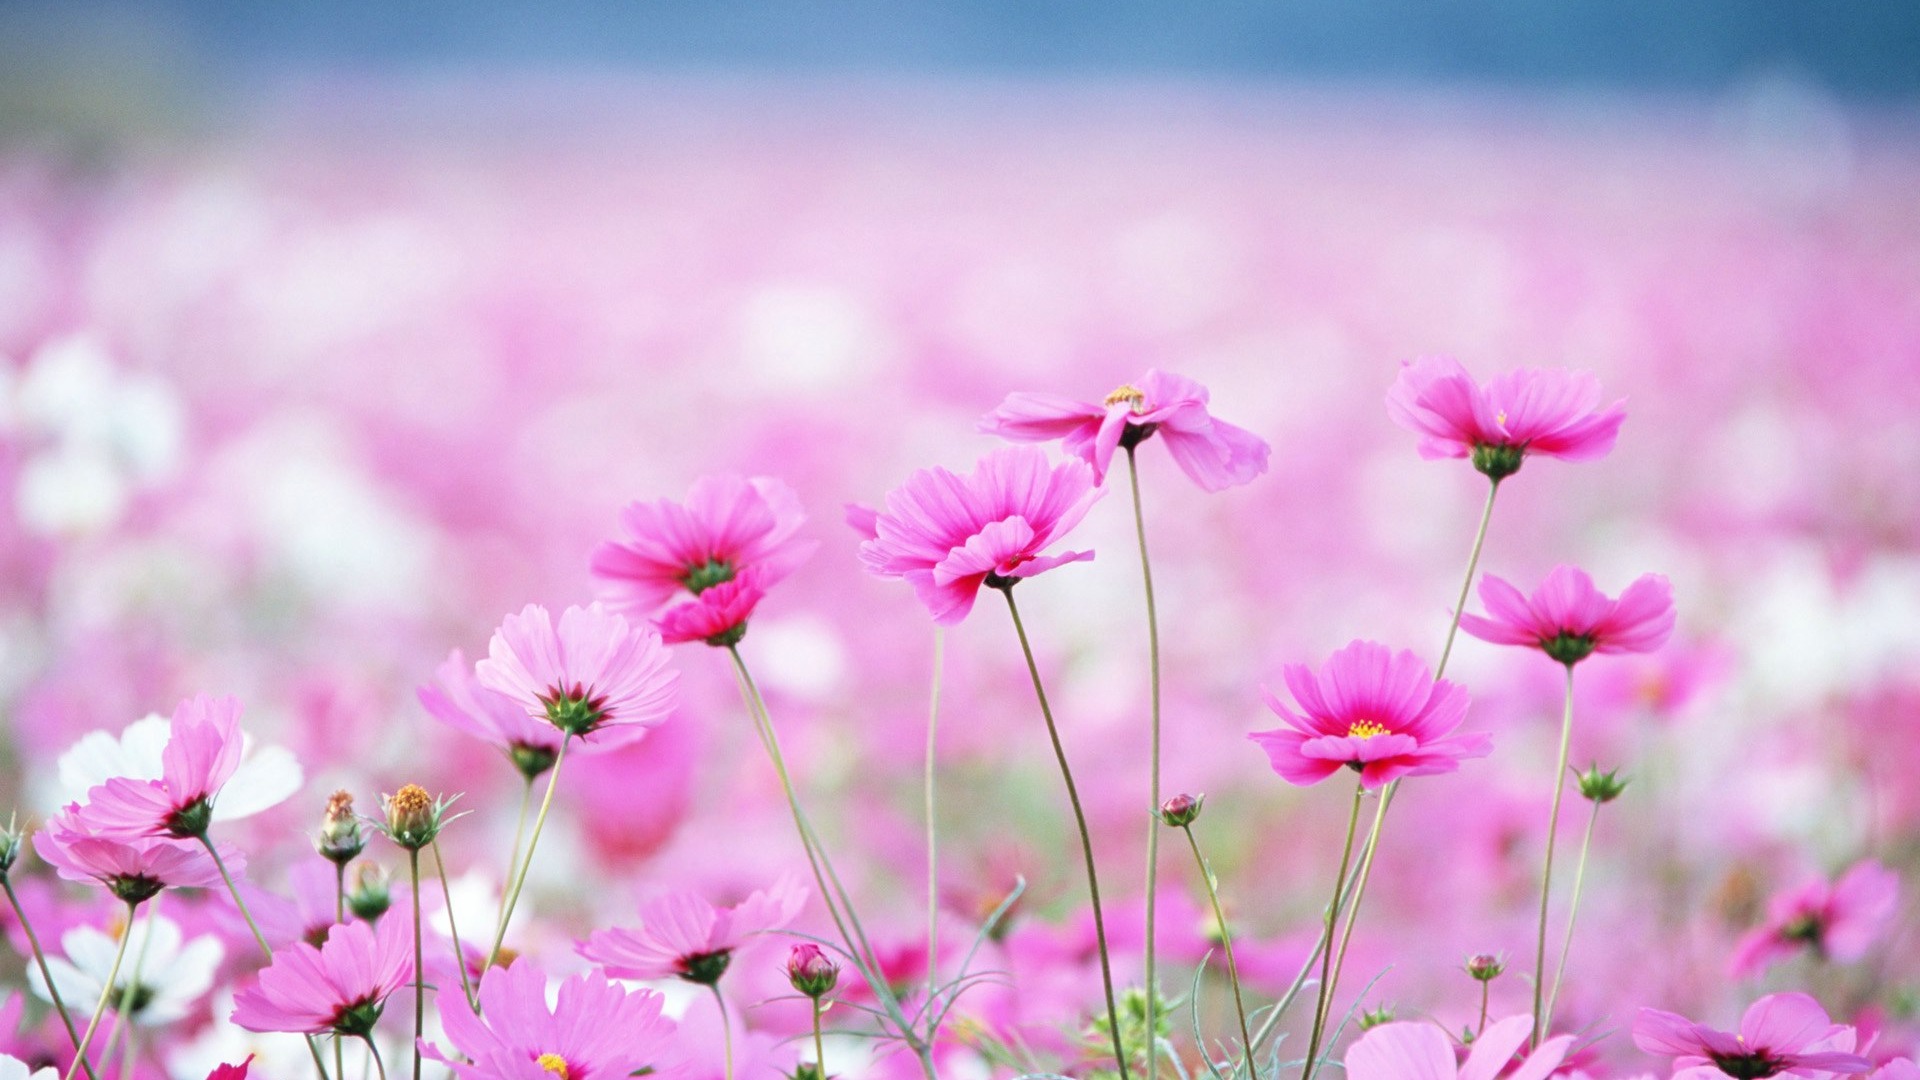 Fresh style Flowers Wallpapers #23 - 1920x1080